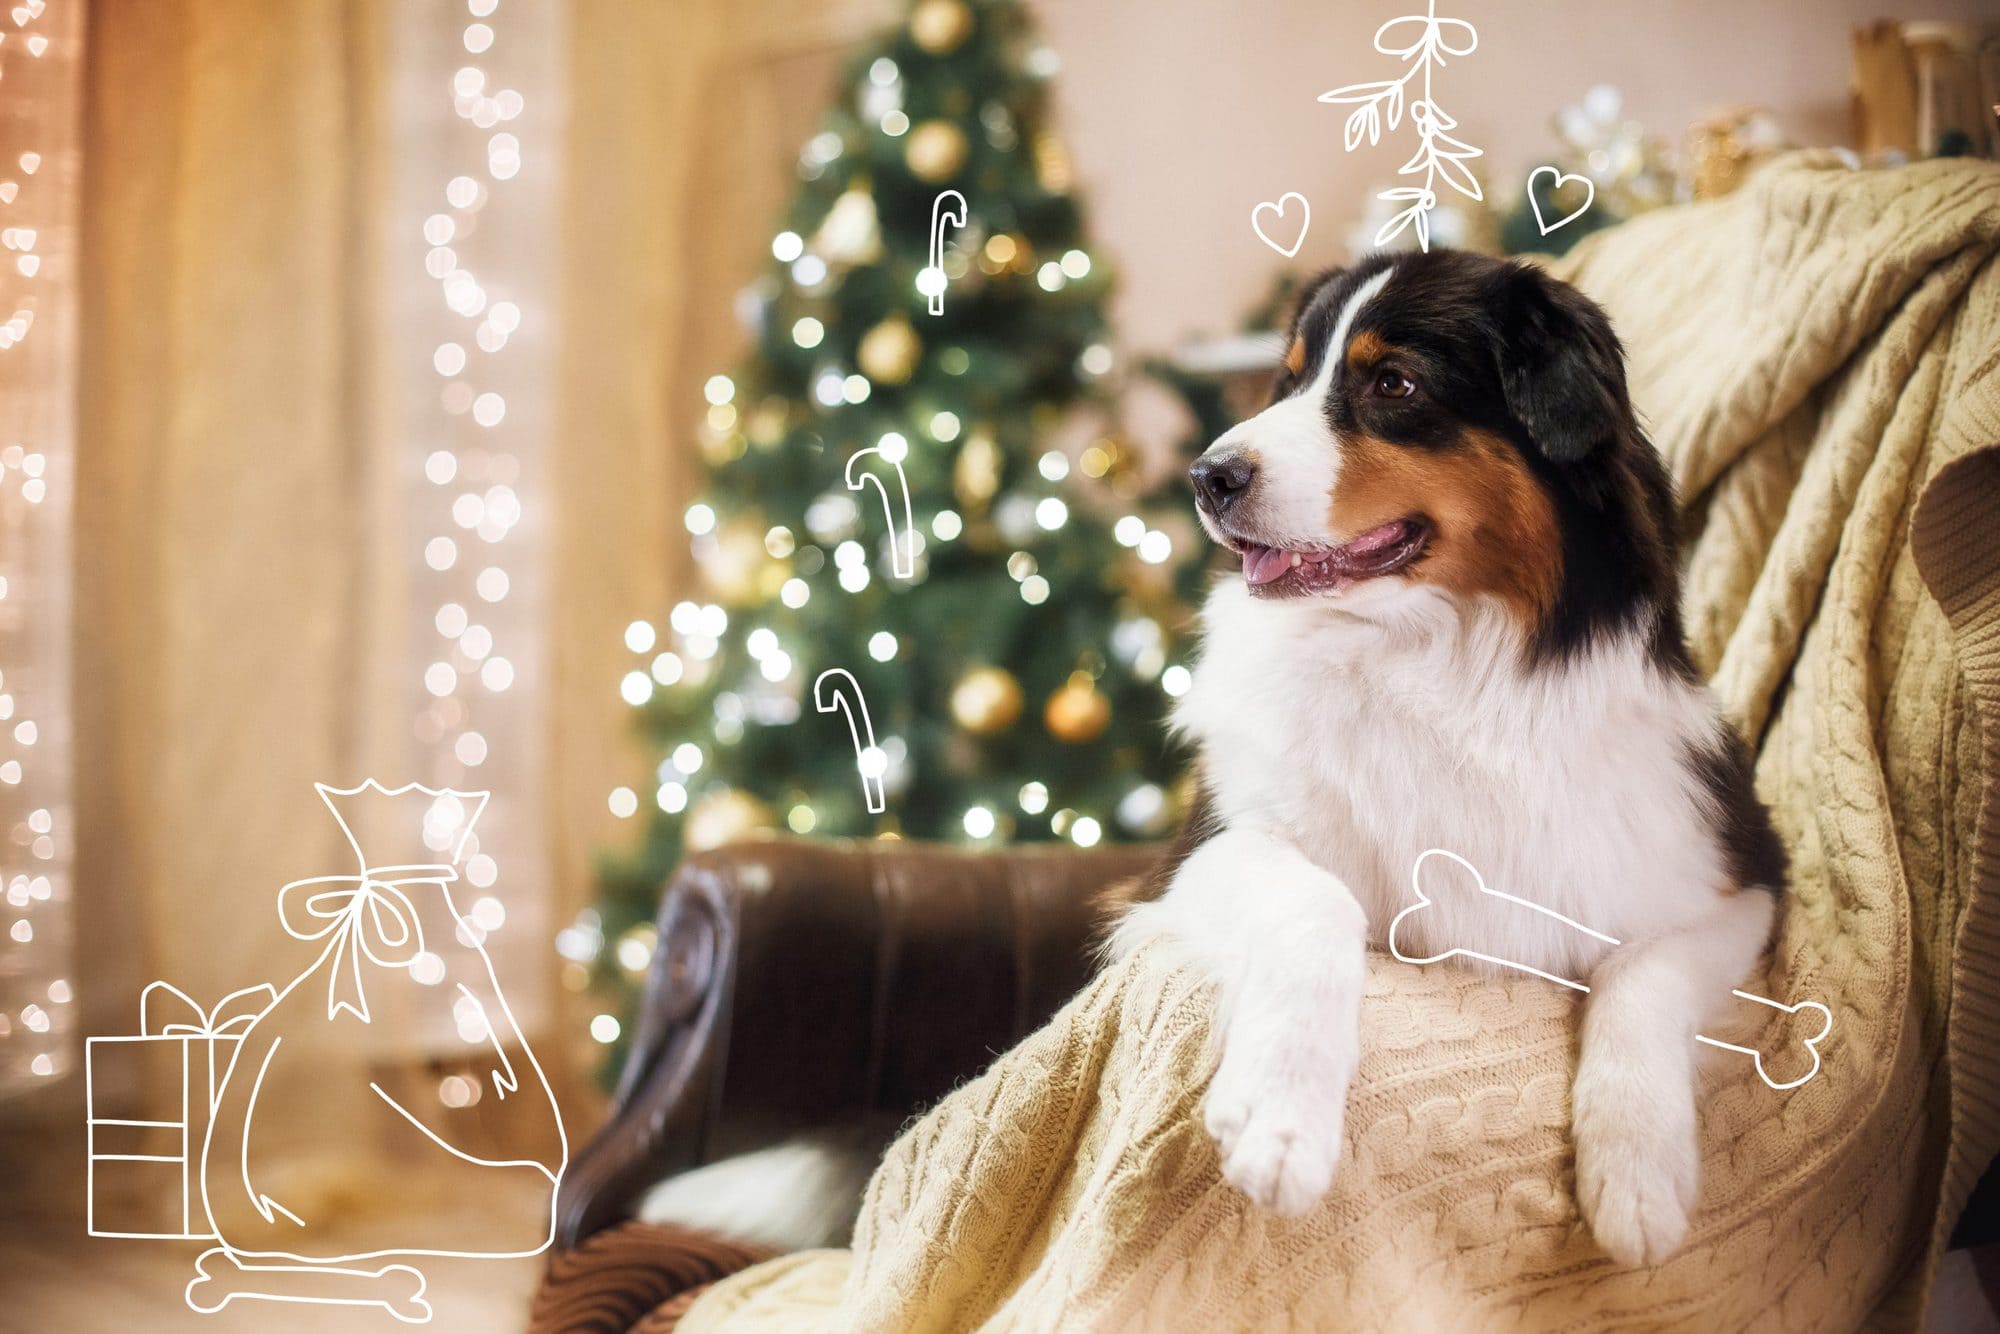 Santa Paws is coming to town: The 2019 dog Christmas gift guide